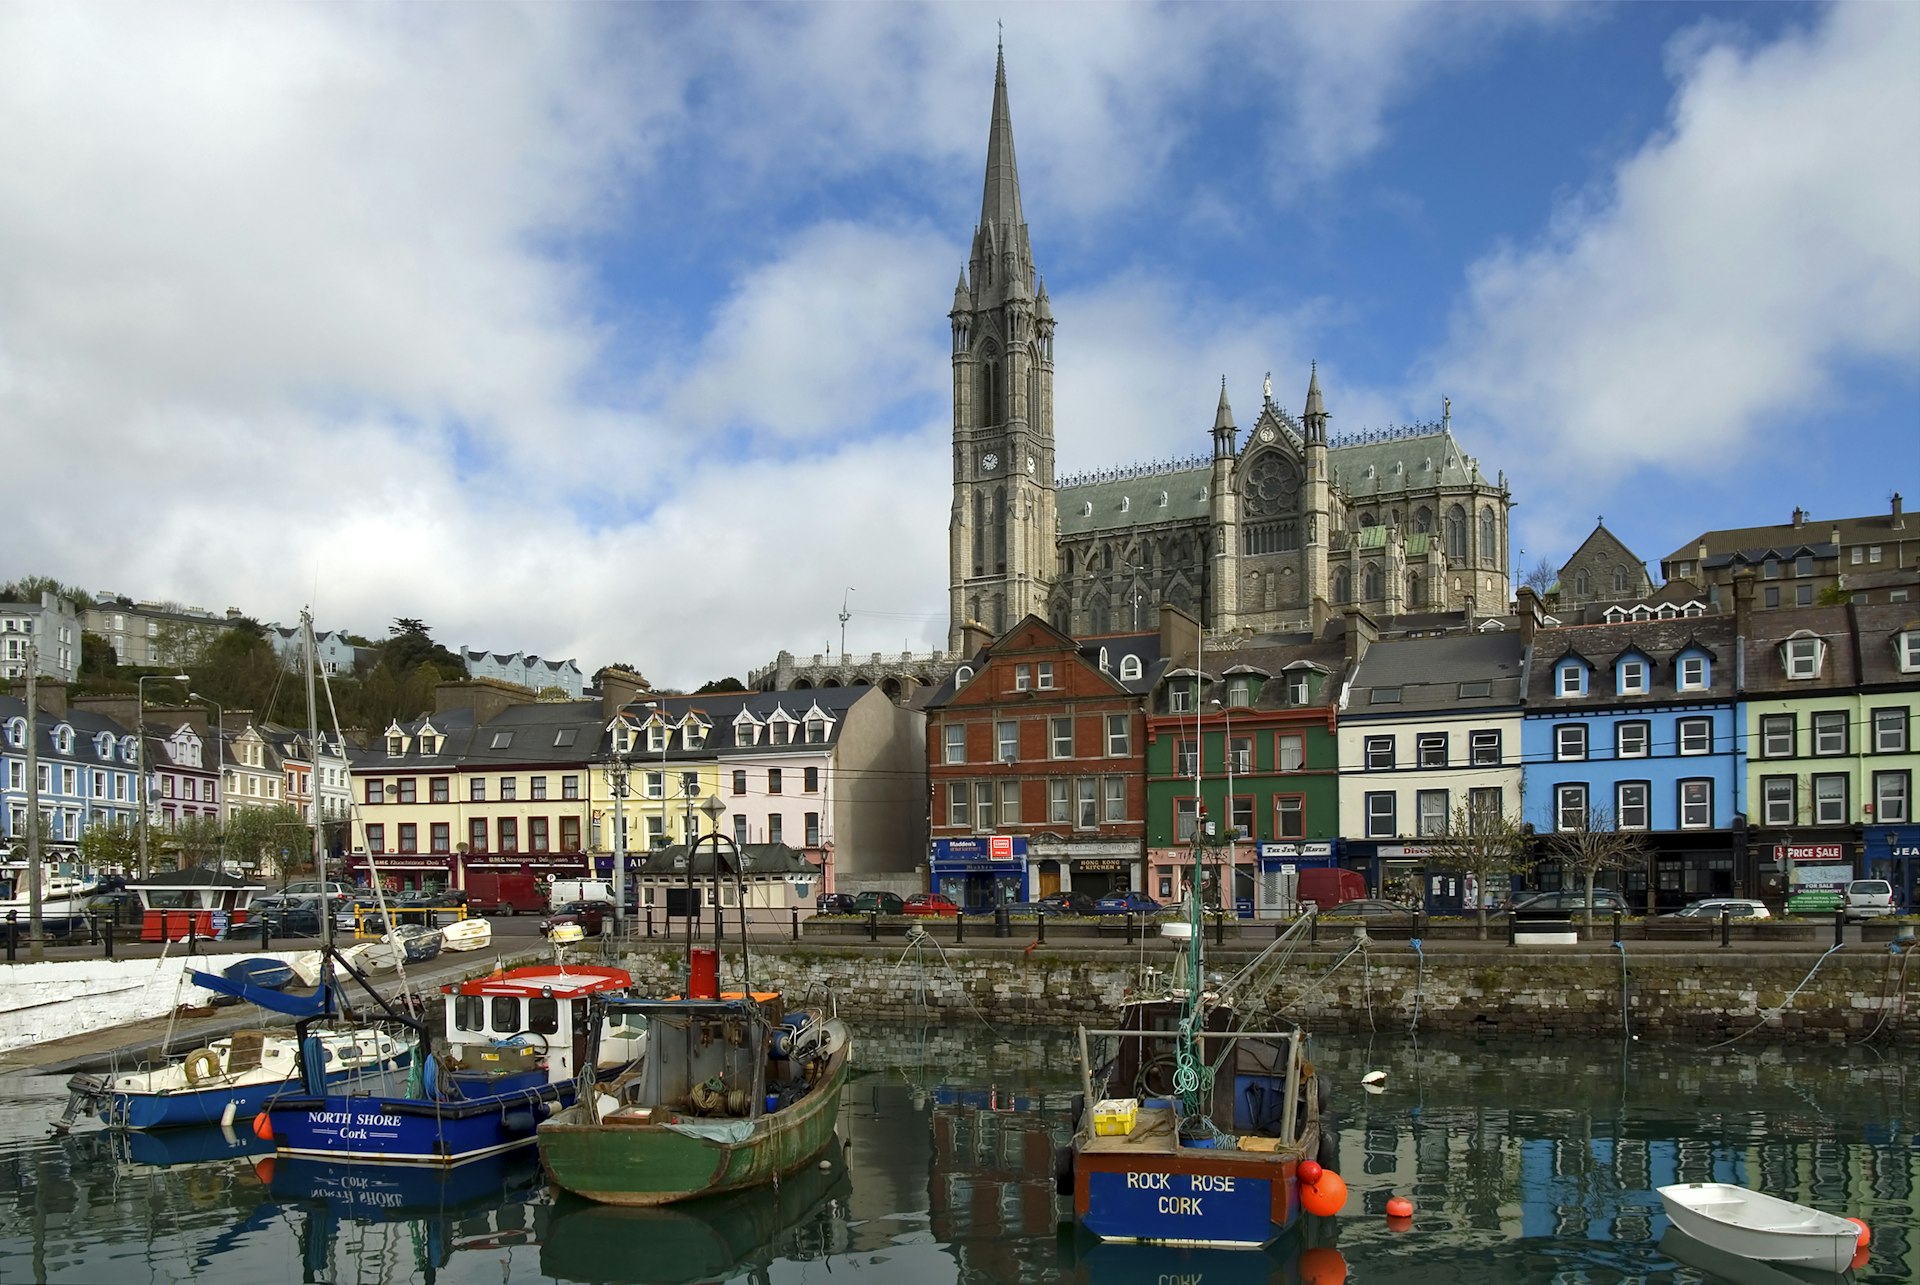 COBH, IRELAND - 2008/04/27: Historical harbour front of the coastal town. (Photo by Olaf Protze/LightRocket via Getty Images)